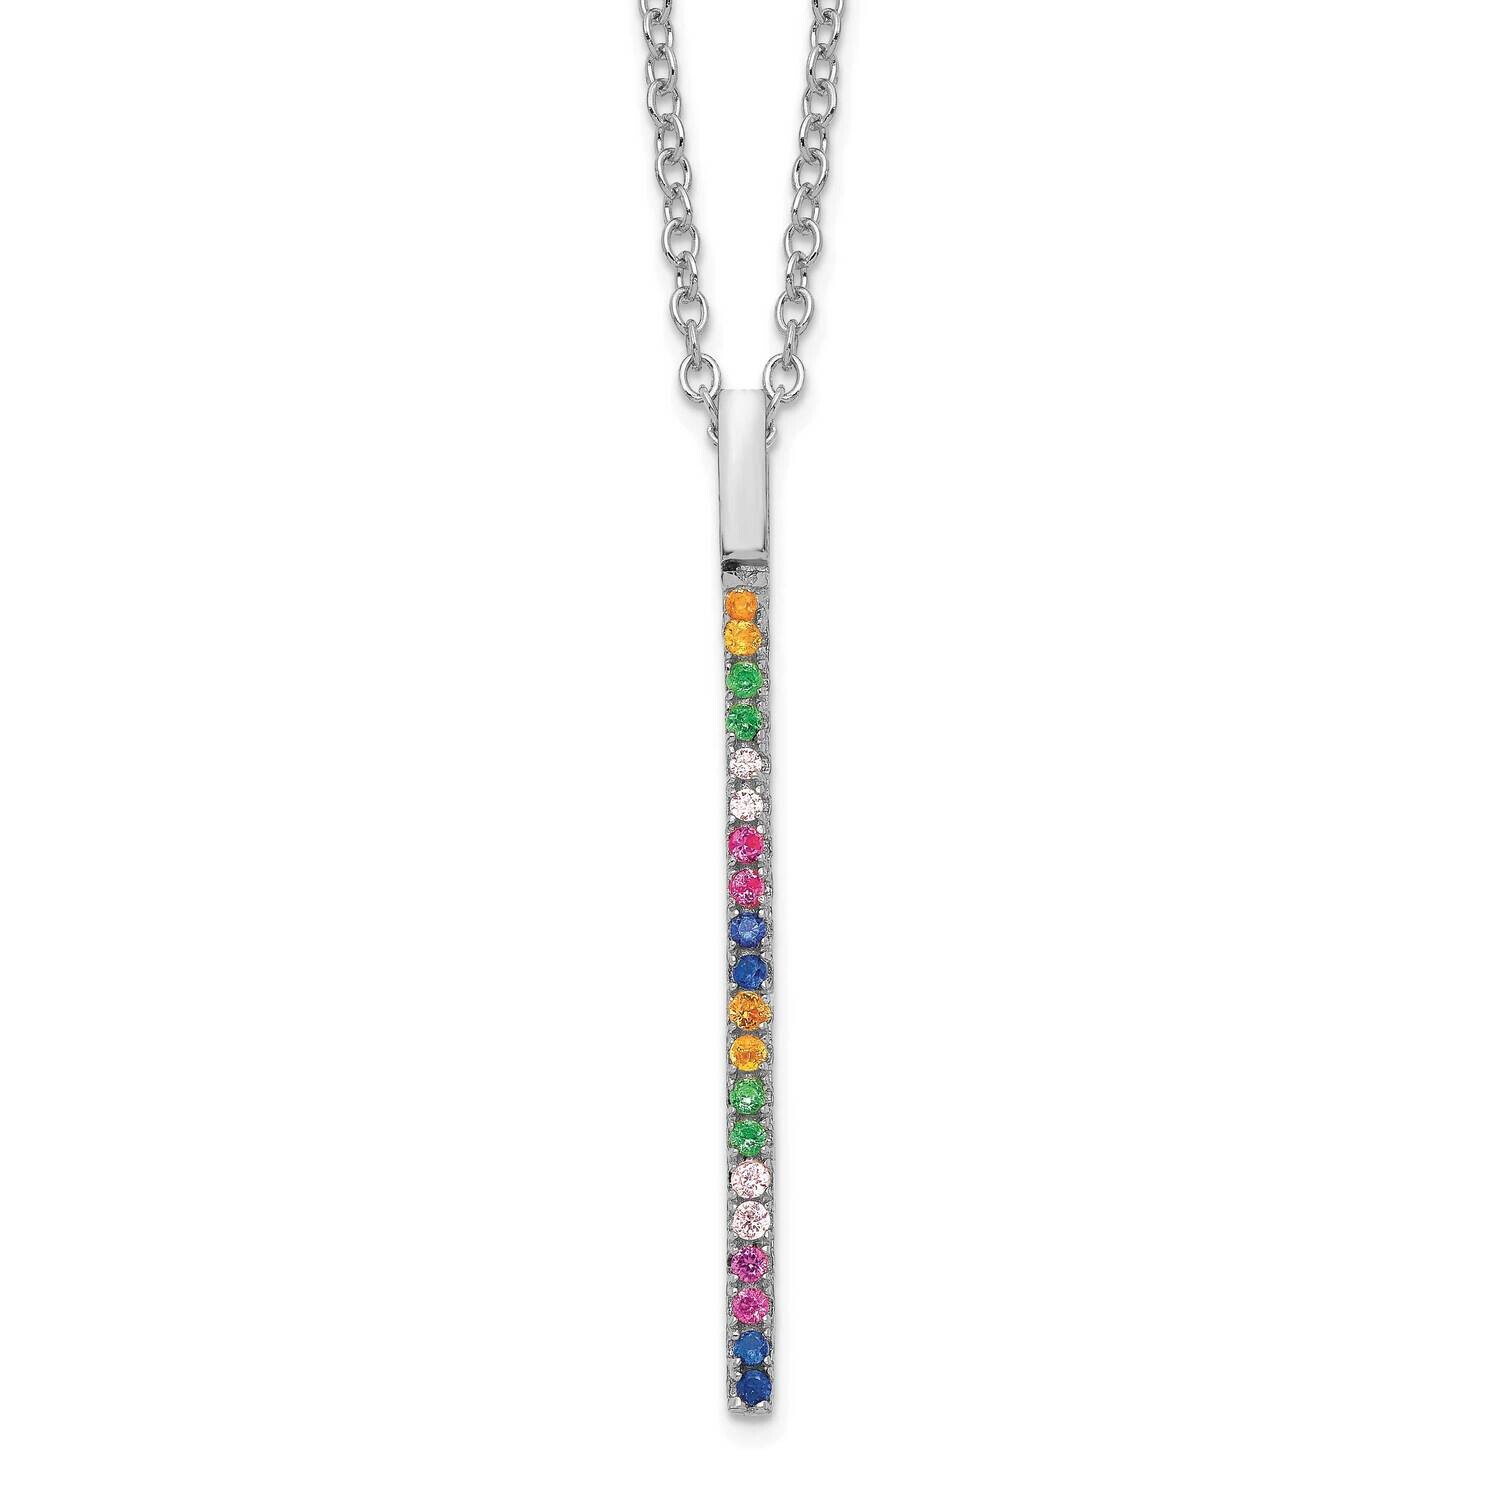 Prizma 16 Inch Colorful CZ Vertical Bar Necklace 2 Inch Extender Sterling Silver Rhodium-Plated QG5049-16